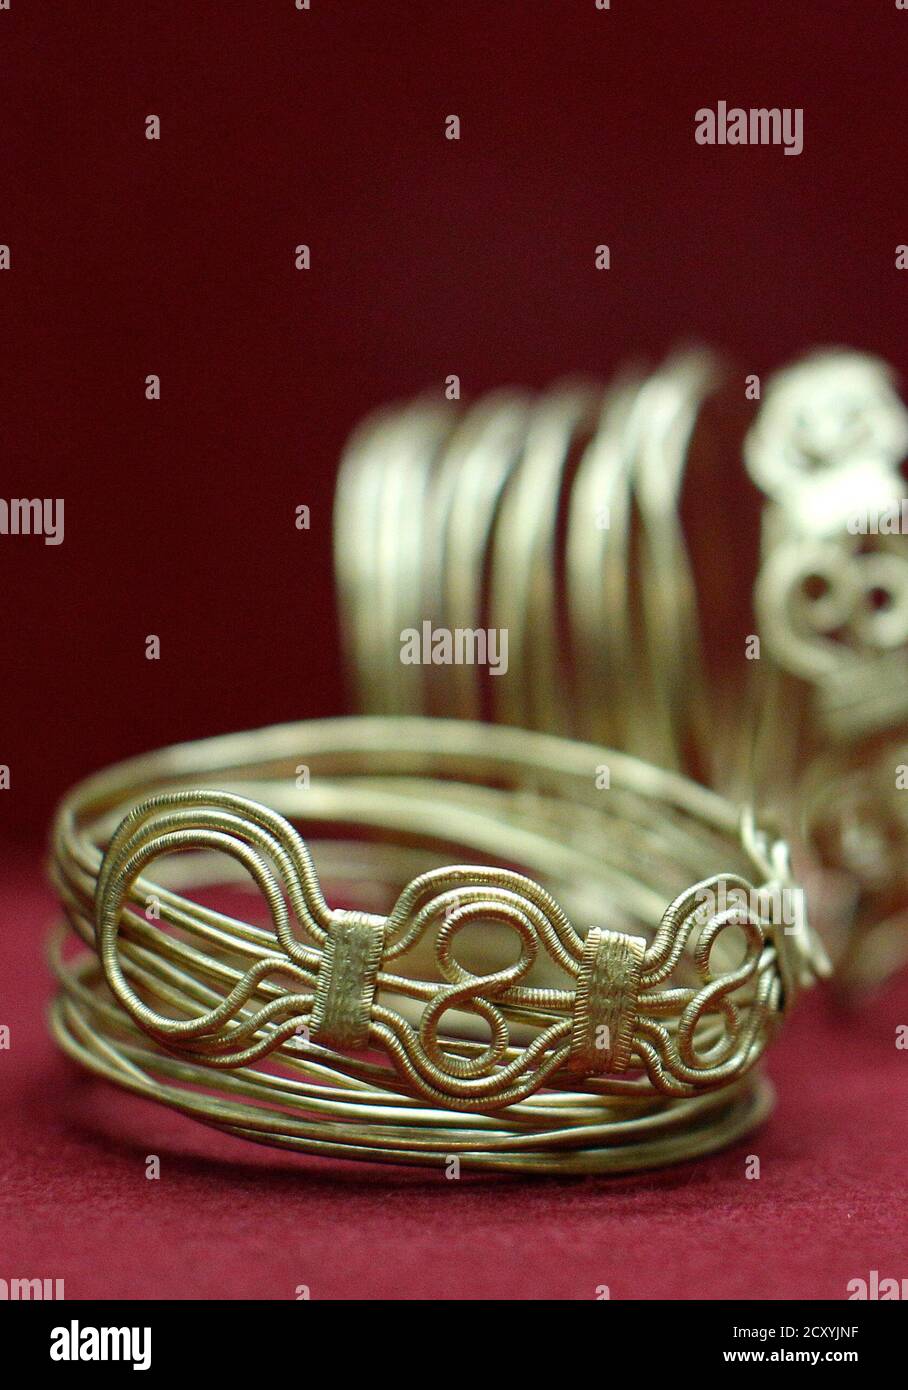 Seven Gold High Resolution Stock Photography and Images - Alamy